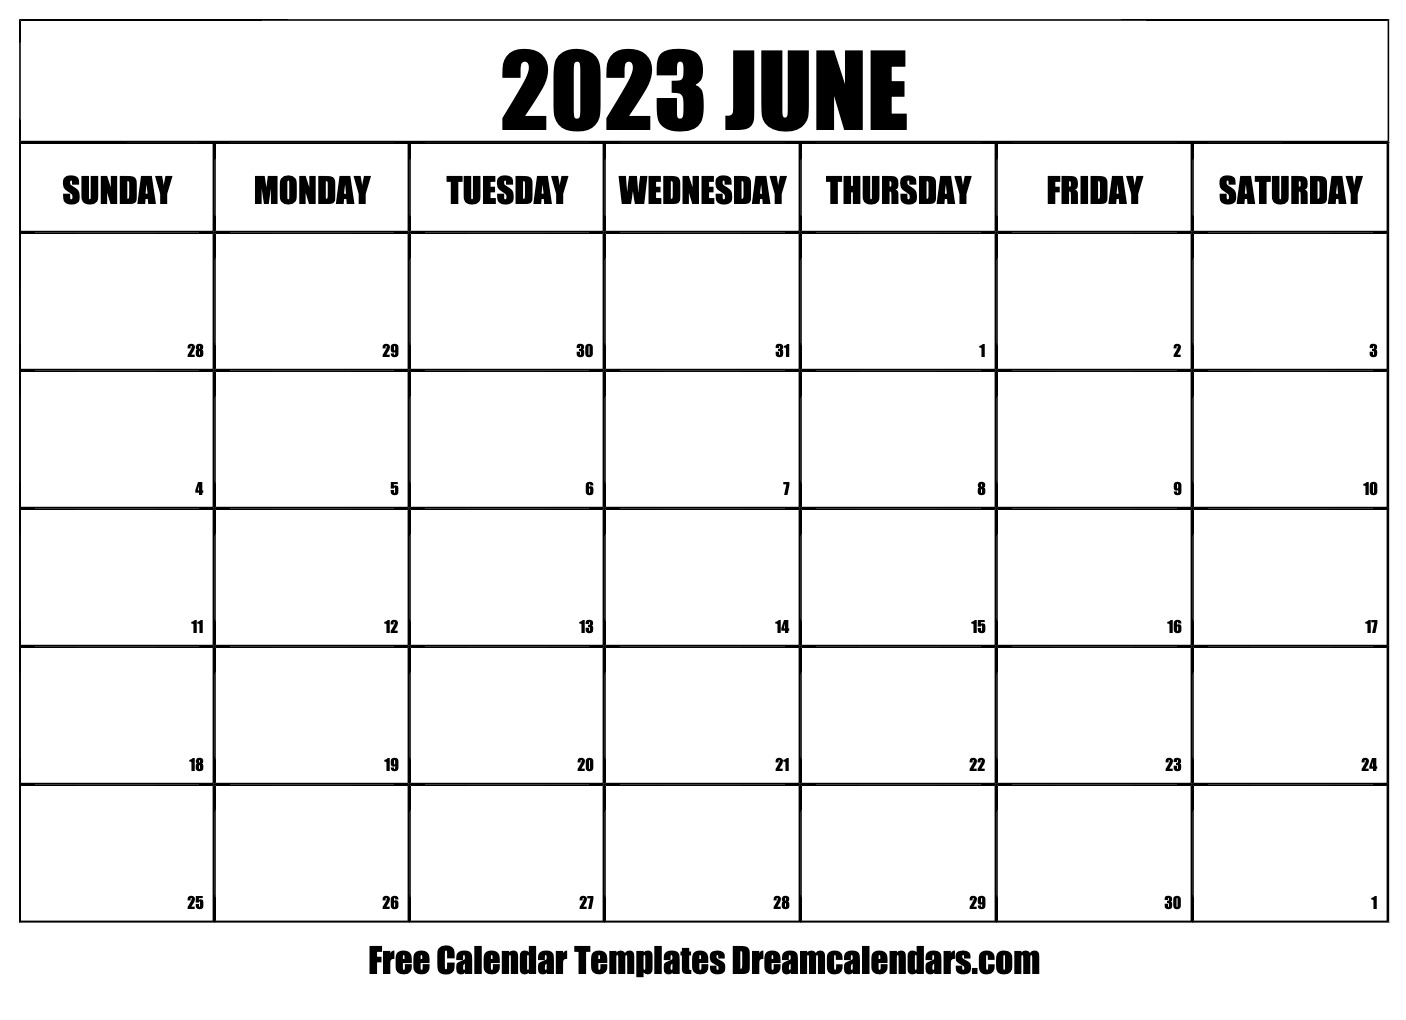 chicago date june 23 2023 when did i conceive